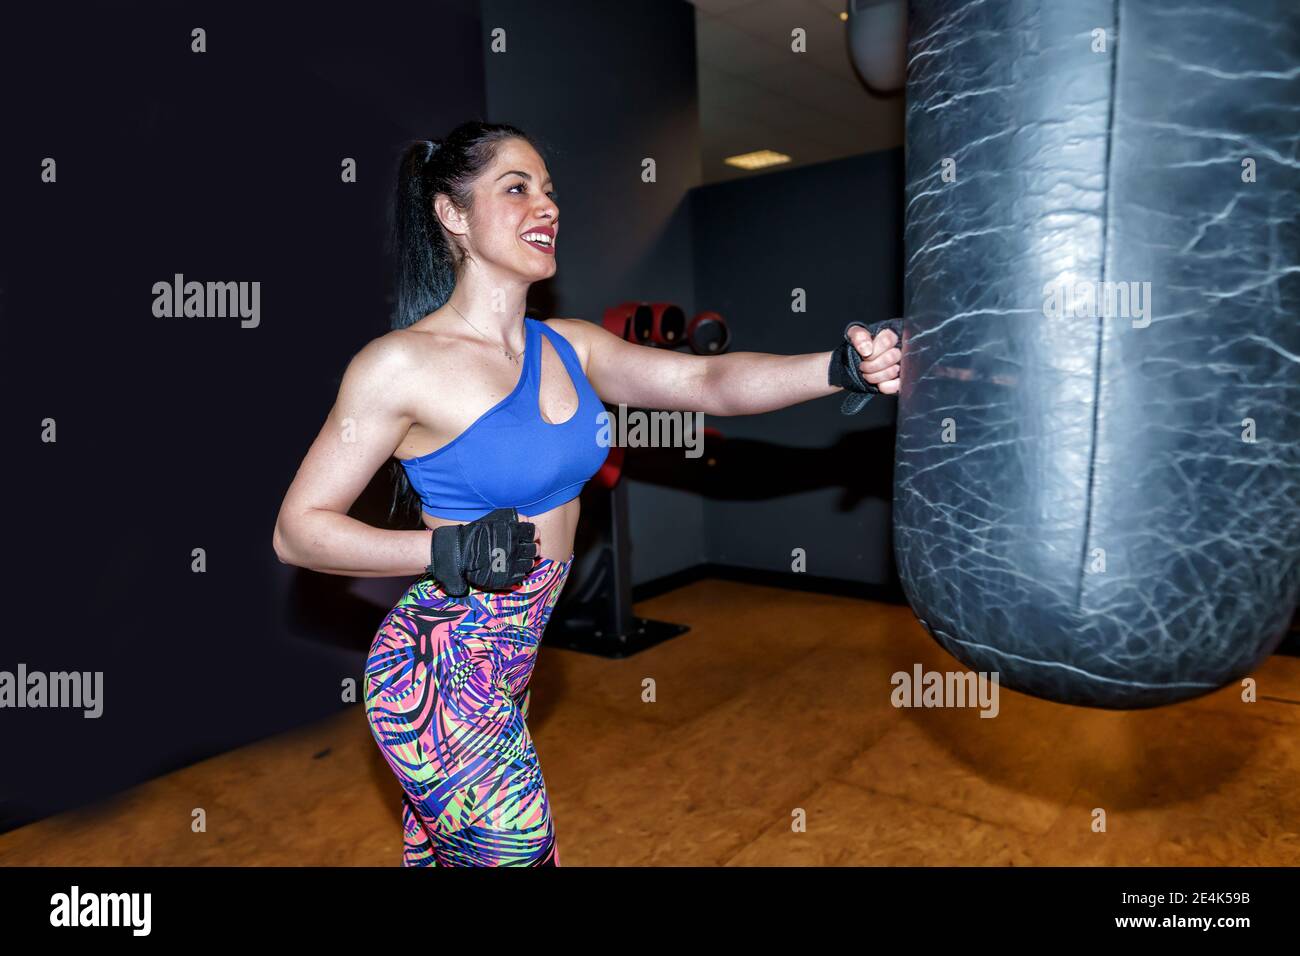 Smiling beautiful woman exercising with punching bag in gym Stock Photo